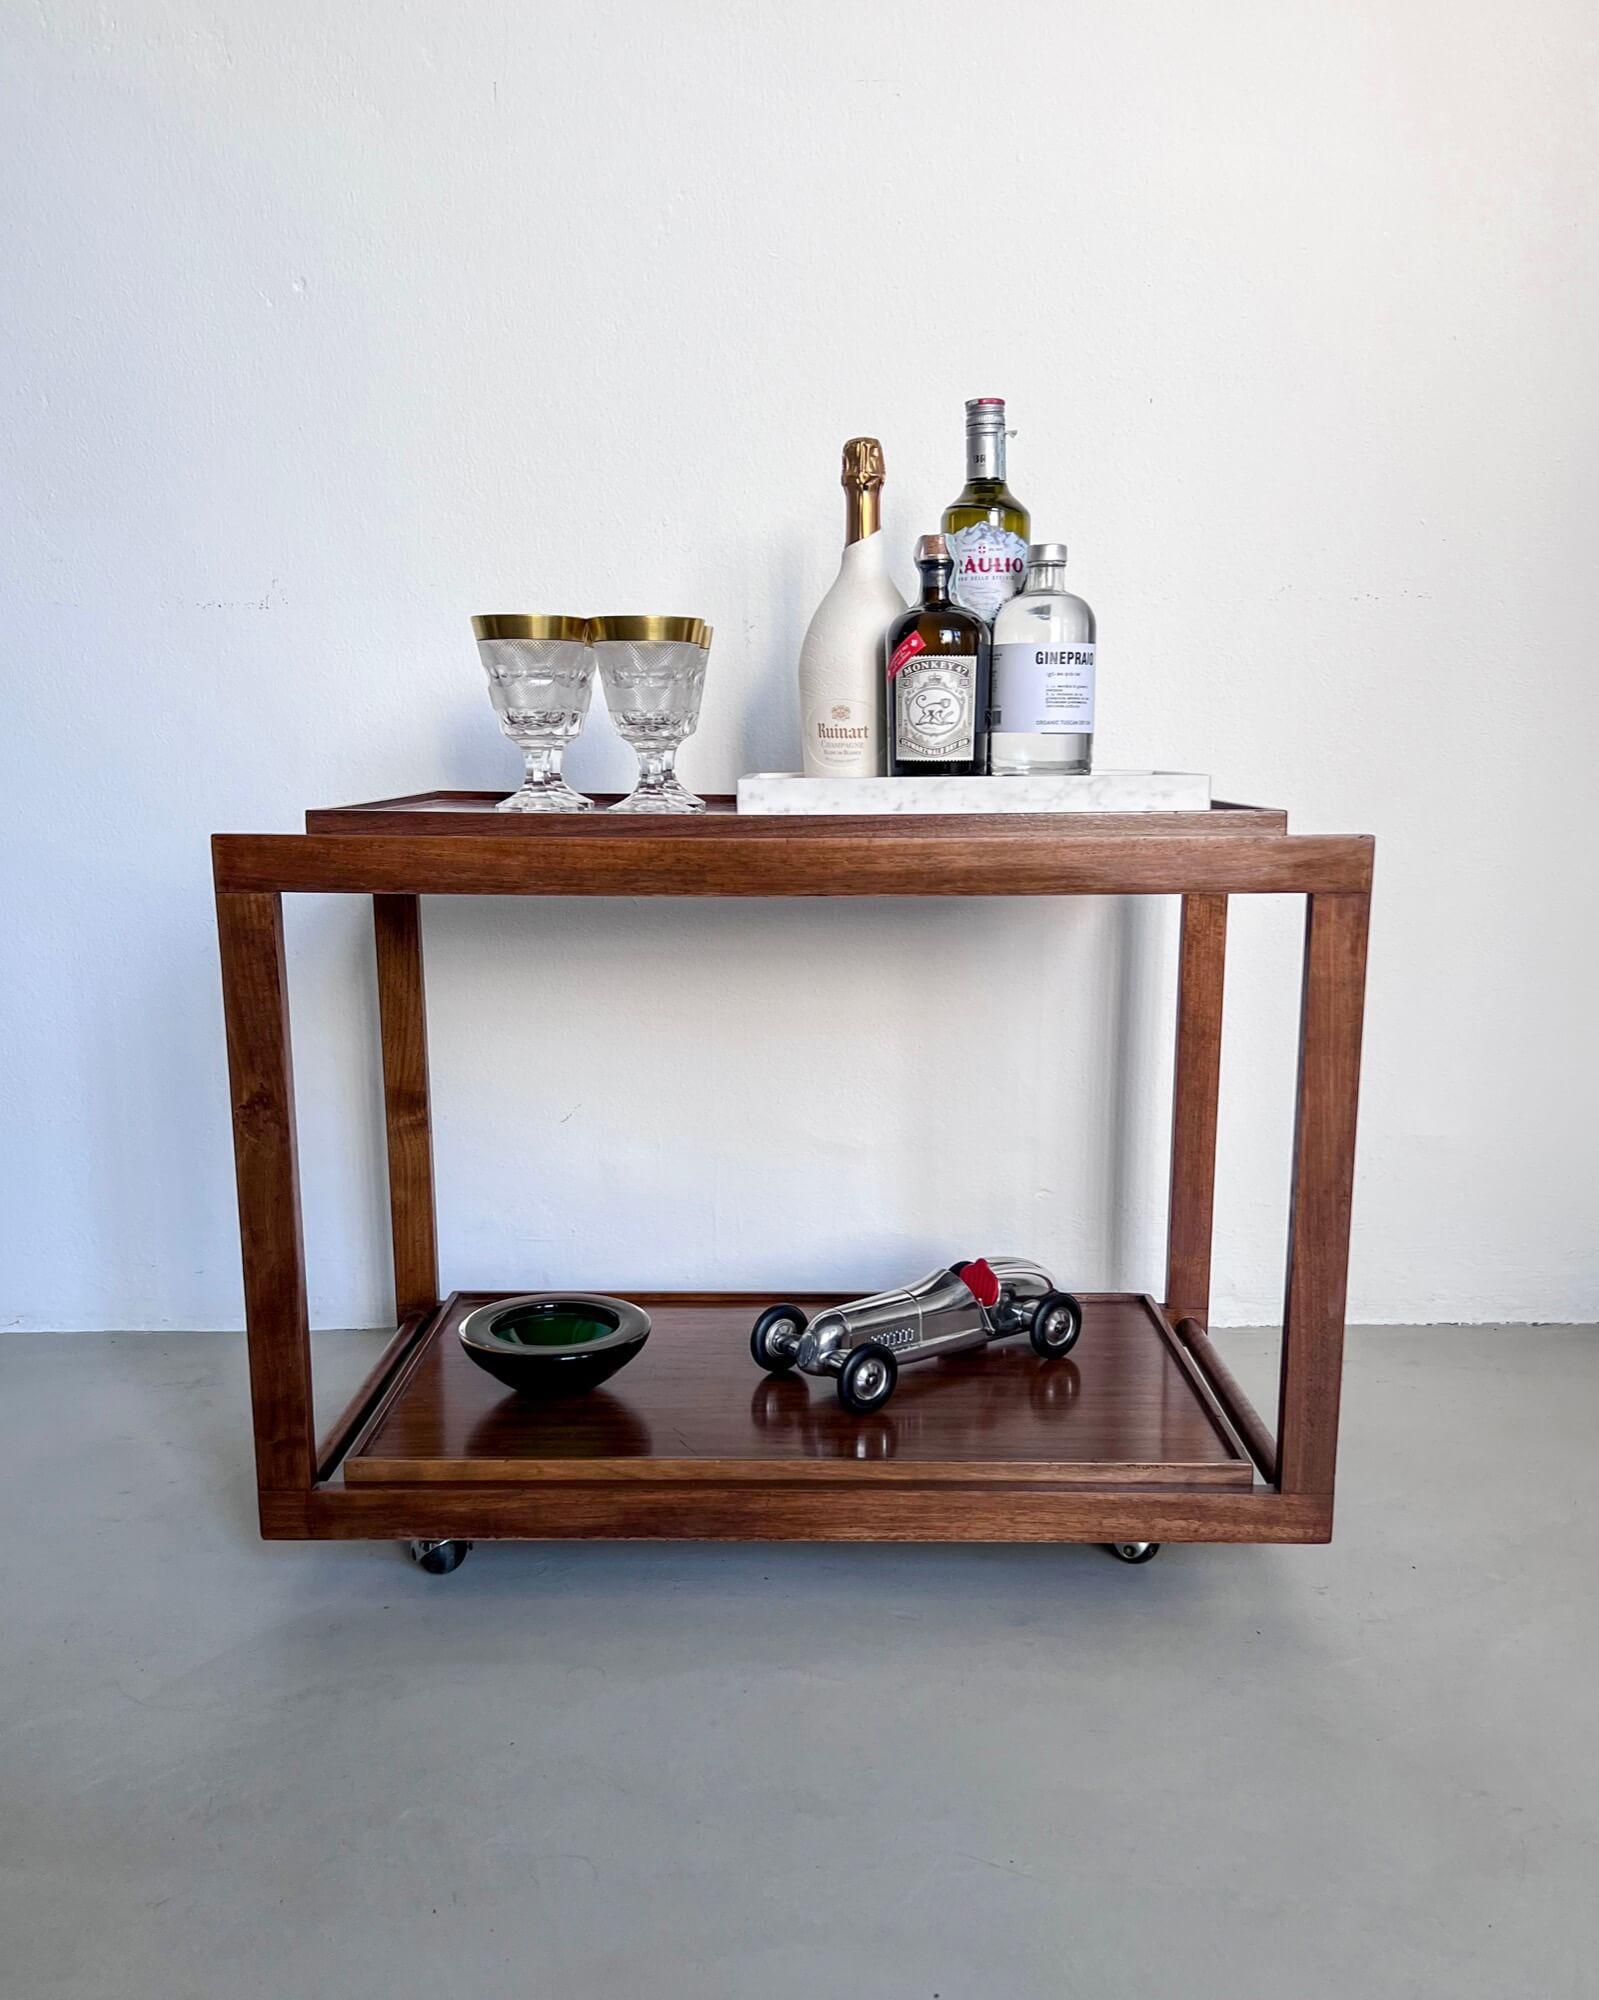 Vintage Bar Cart - Trolley - Mid century design 

Designed by Salvati and Tresoldi for the Italian furniture giant, the cart is absolutely essential - better, rational - in its simple geometric wood frame. But, behold, its two shelves can be easily